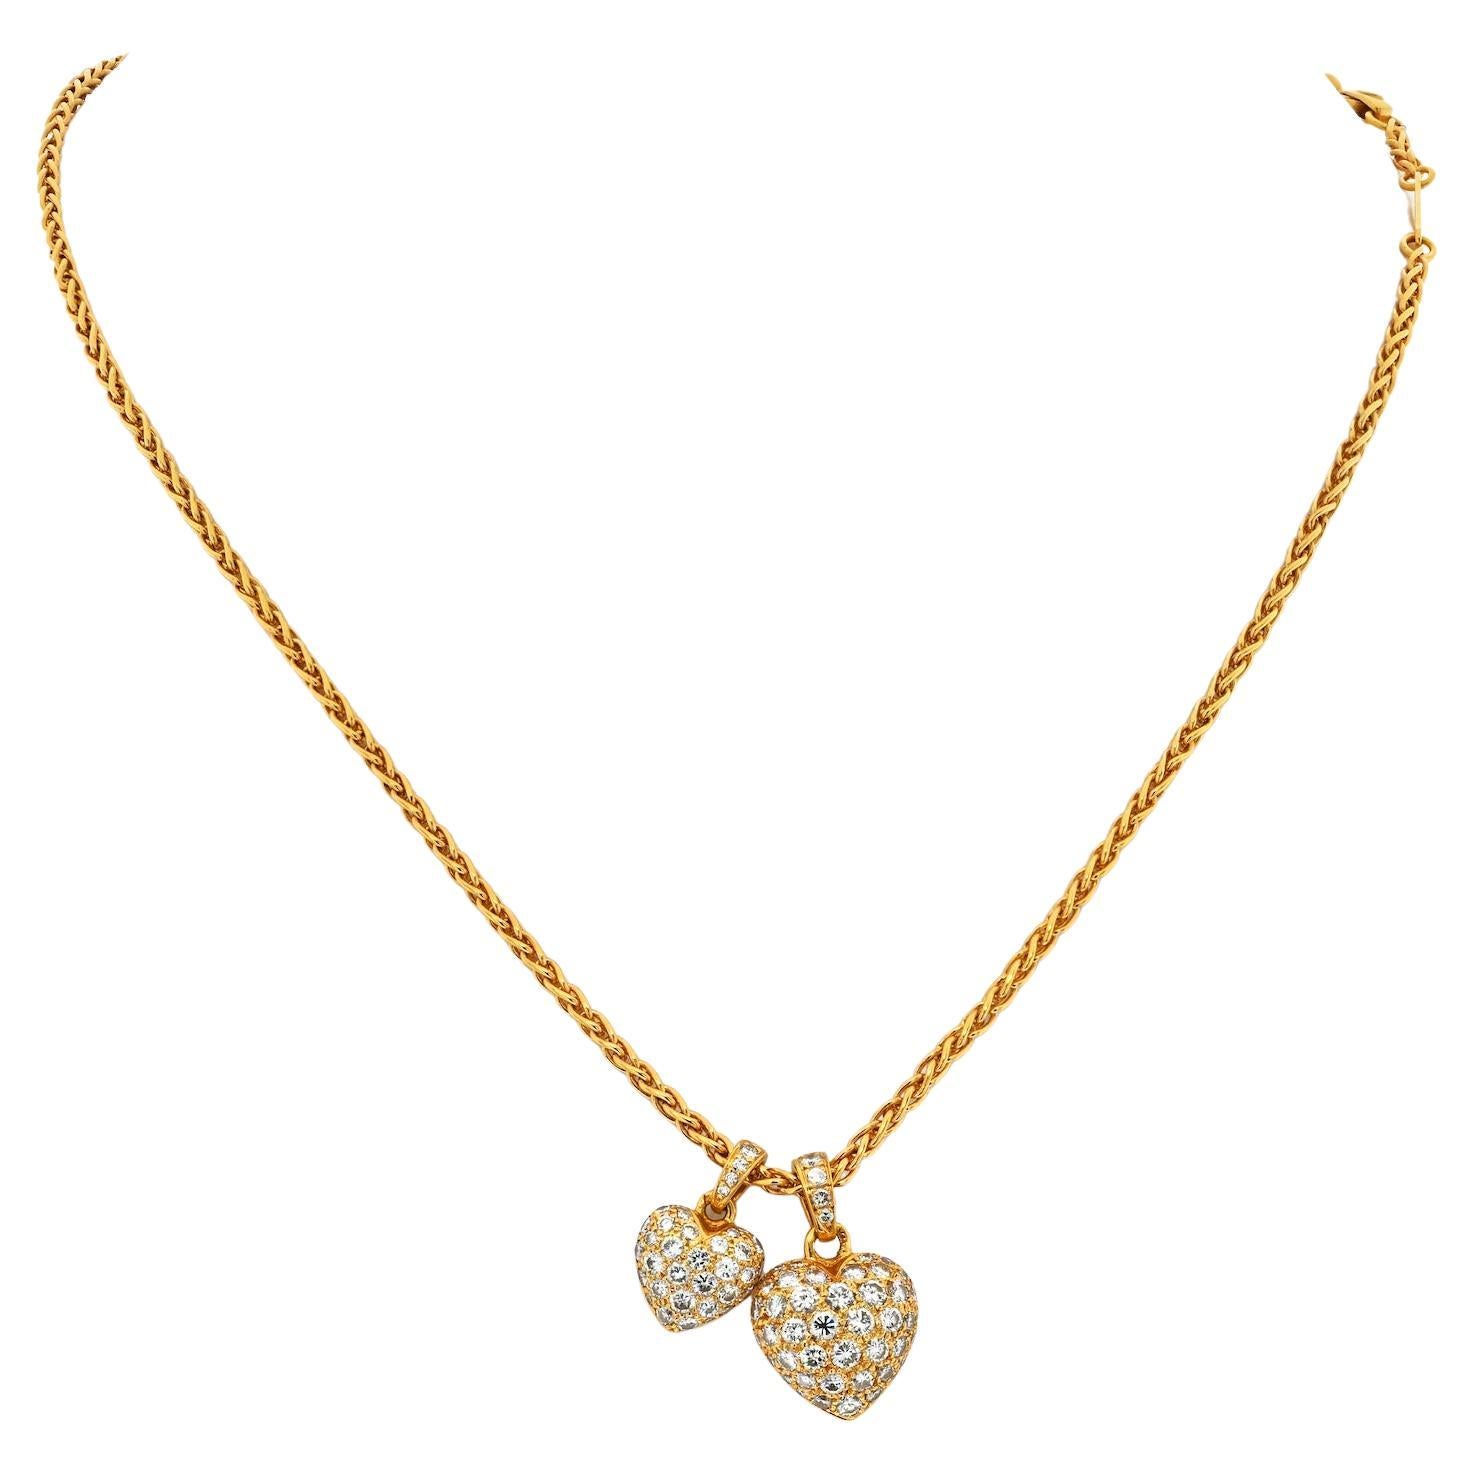 Cartier 18K Yellow Gold Puffy Hearts Pave Round Diamond Pendant Necklace